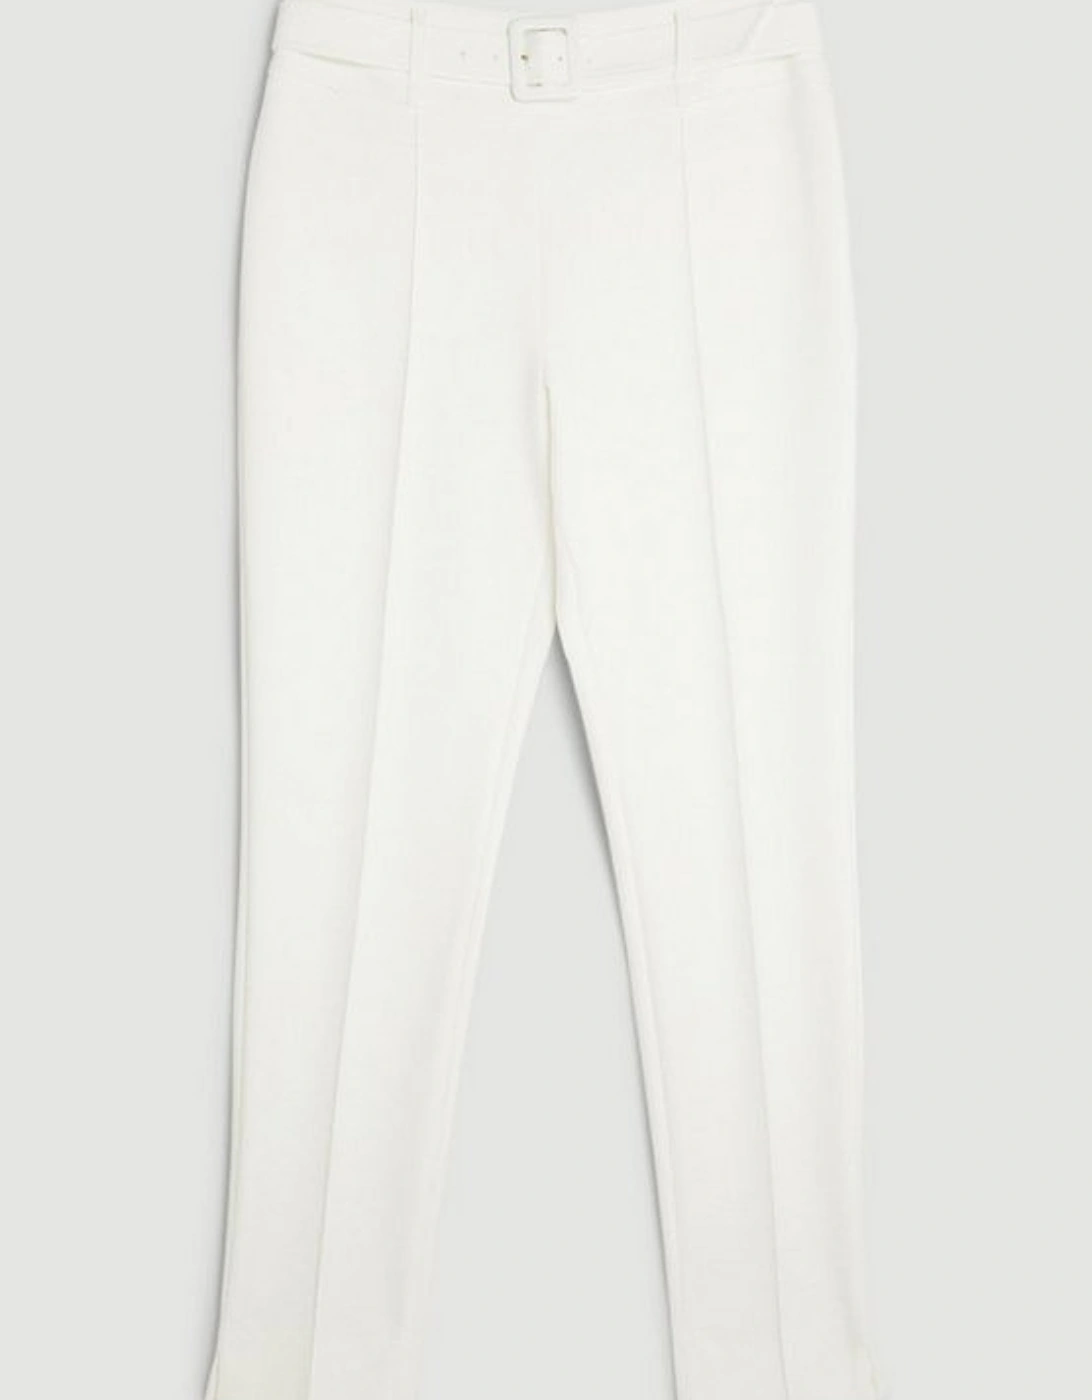 The Founder Tailored Compact Stretch High Waist Slim Leg Trousers